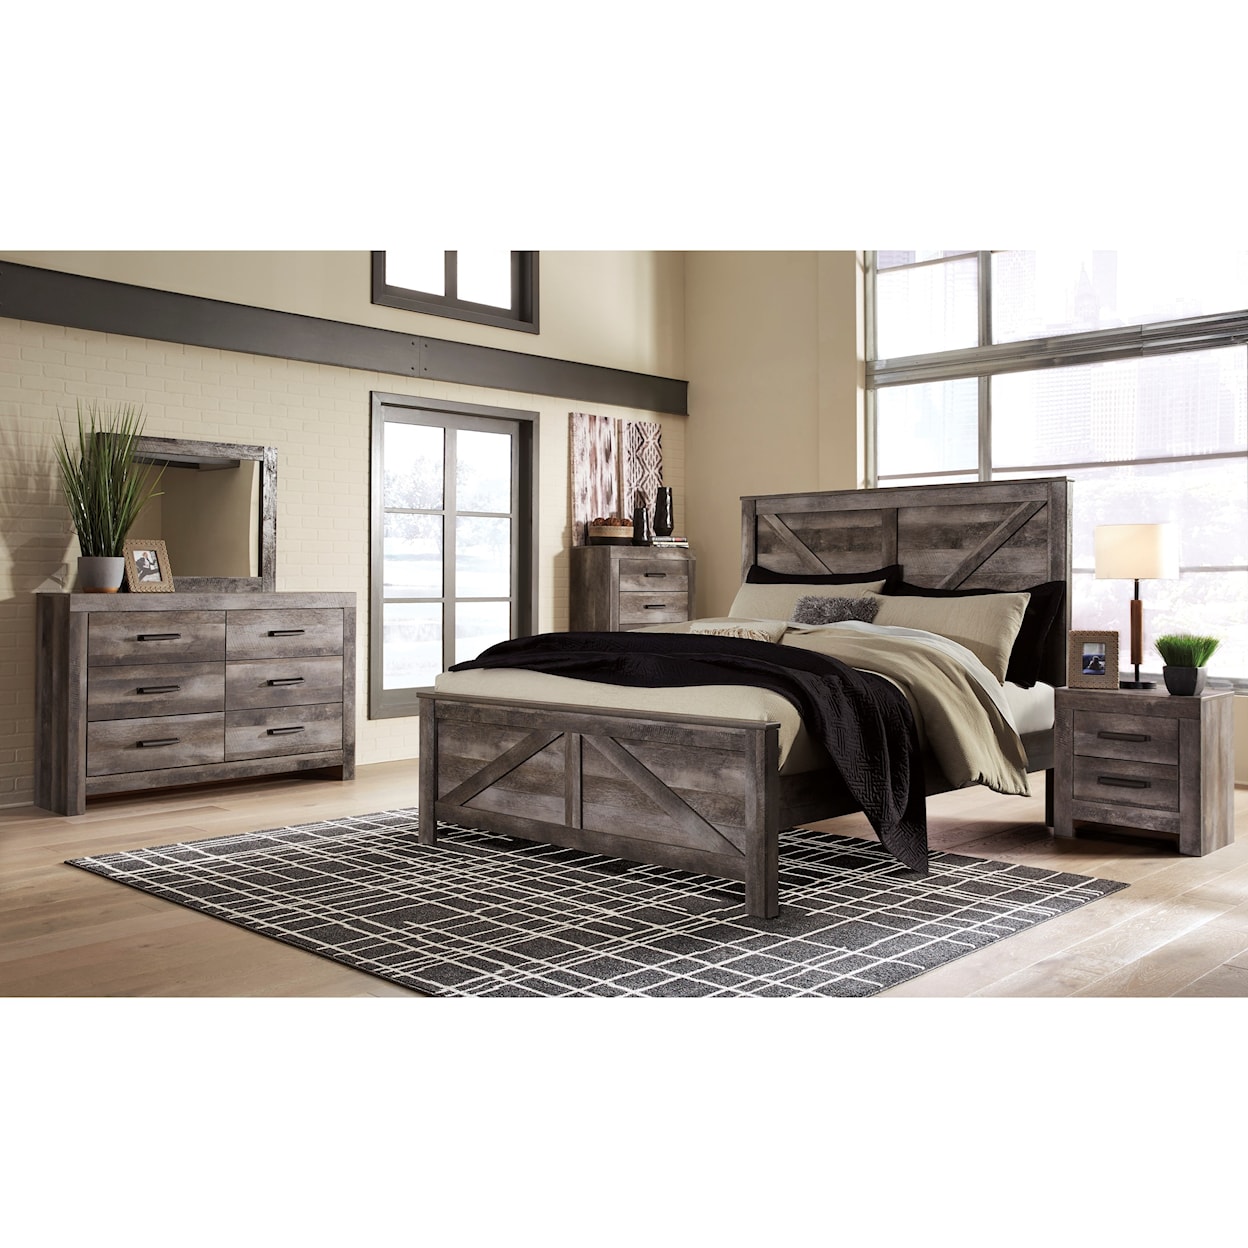 Signature Design by Ashley Wynnlow King Bedroom Group